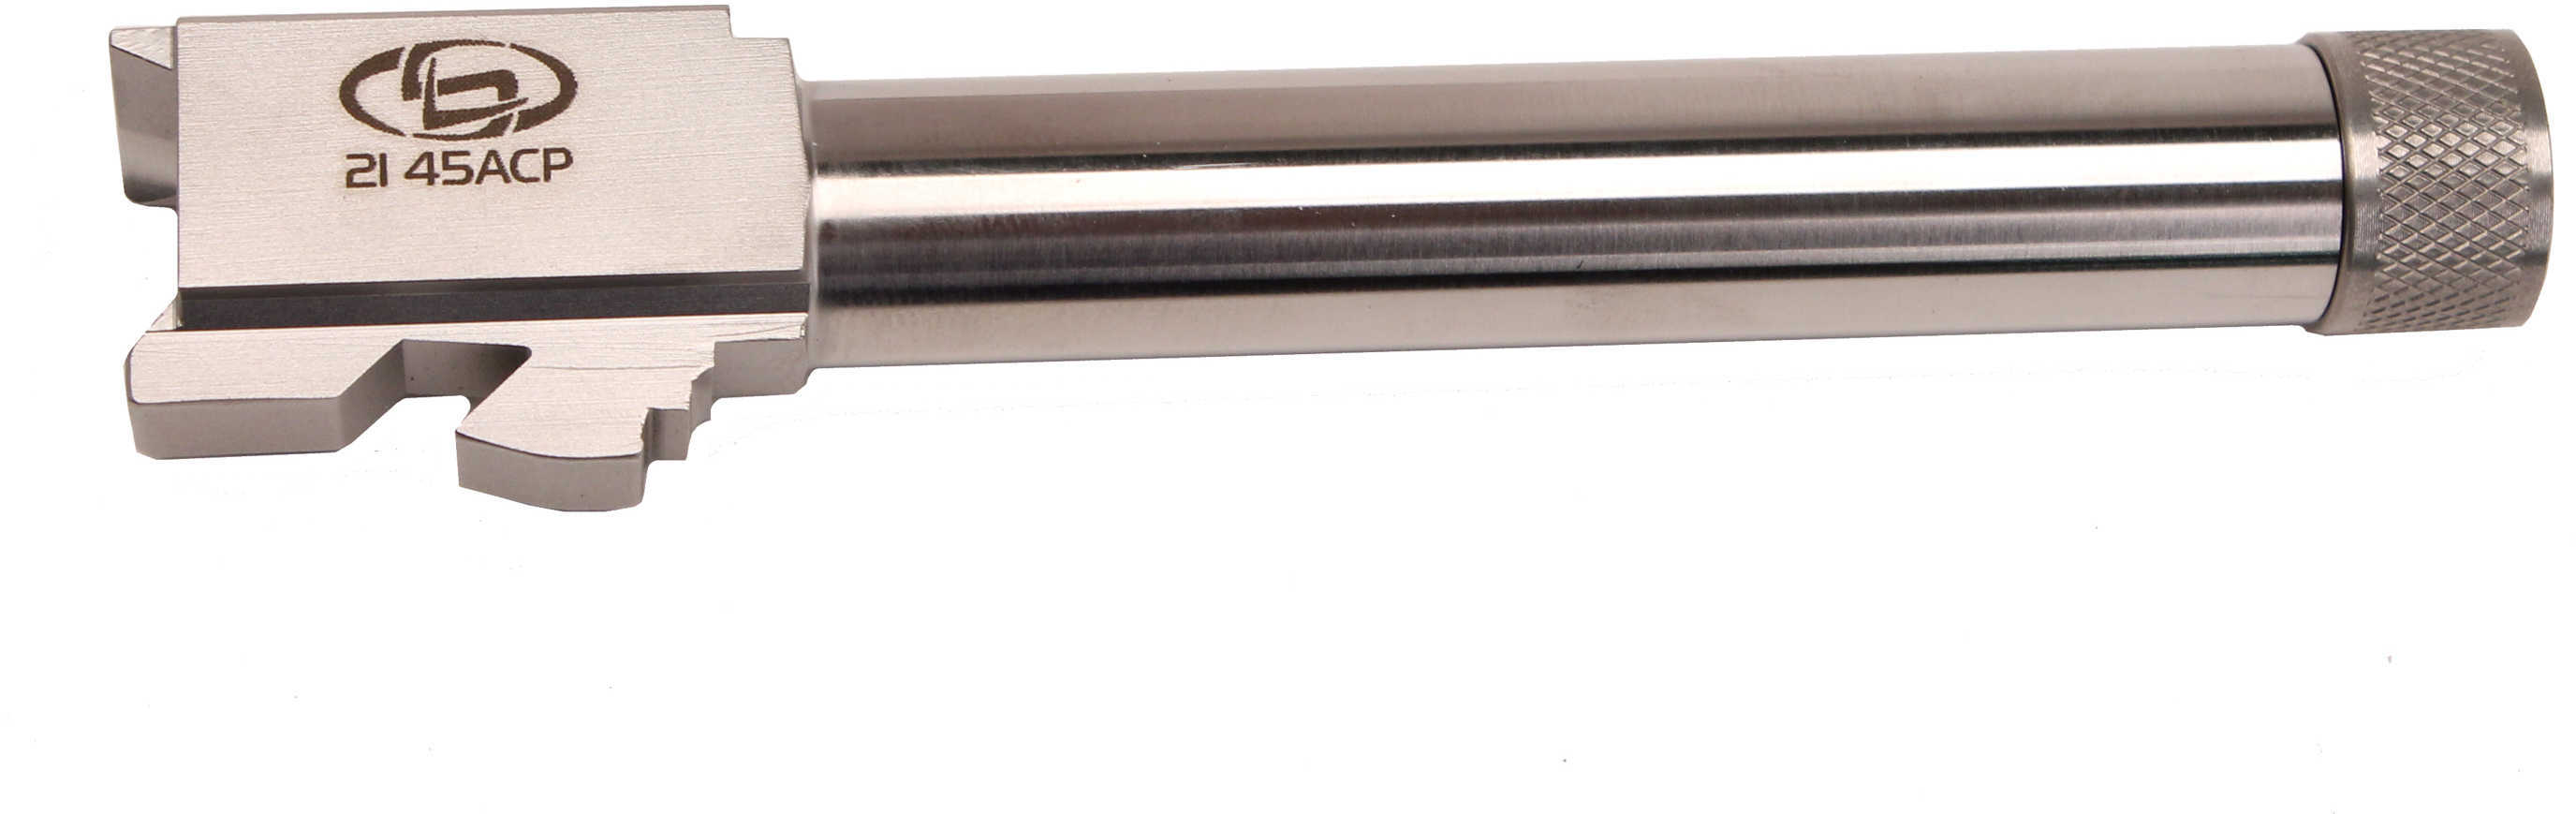 StormLake Barrels Lake 45 ACP 5.3" Stainless With Thread Protector Threaded .578-28 Glk 21 5T-AT GL-21- -530-OP-0